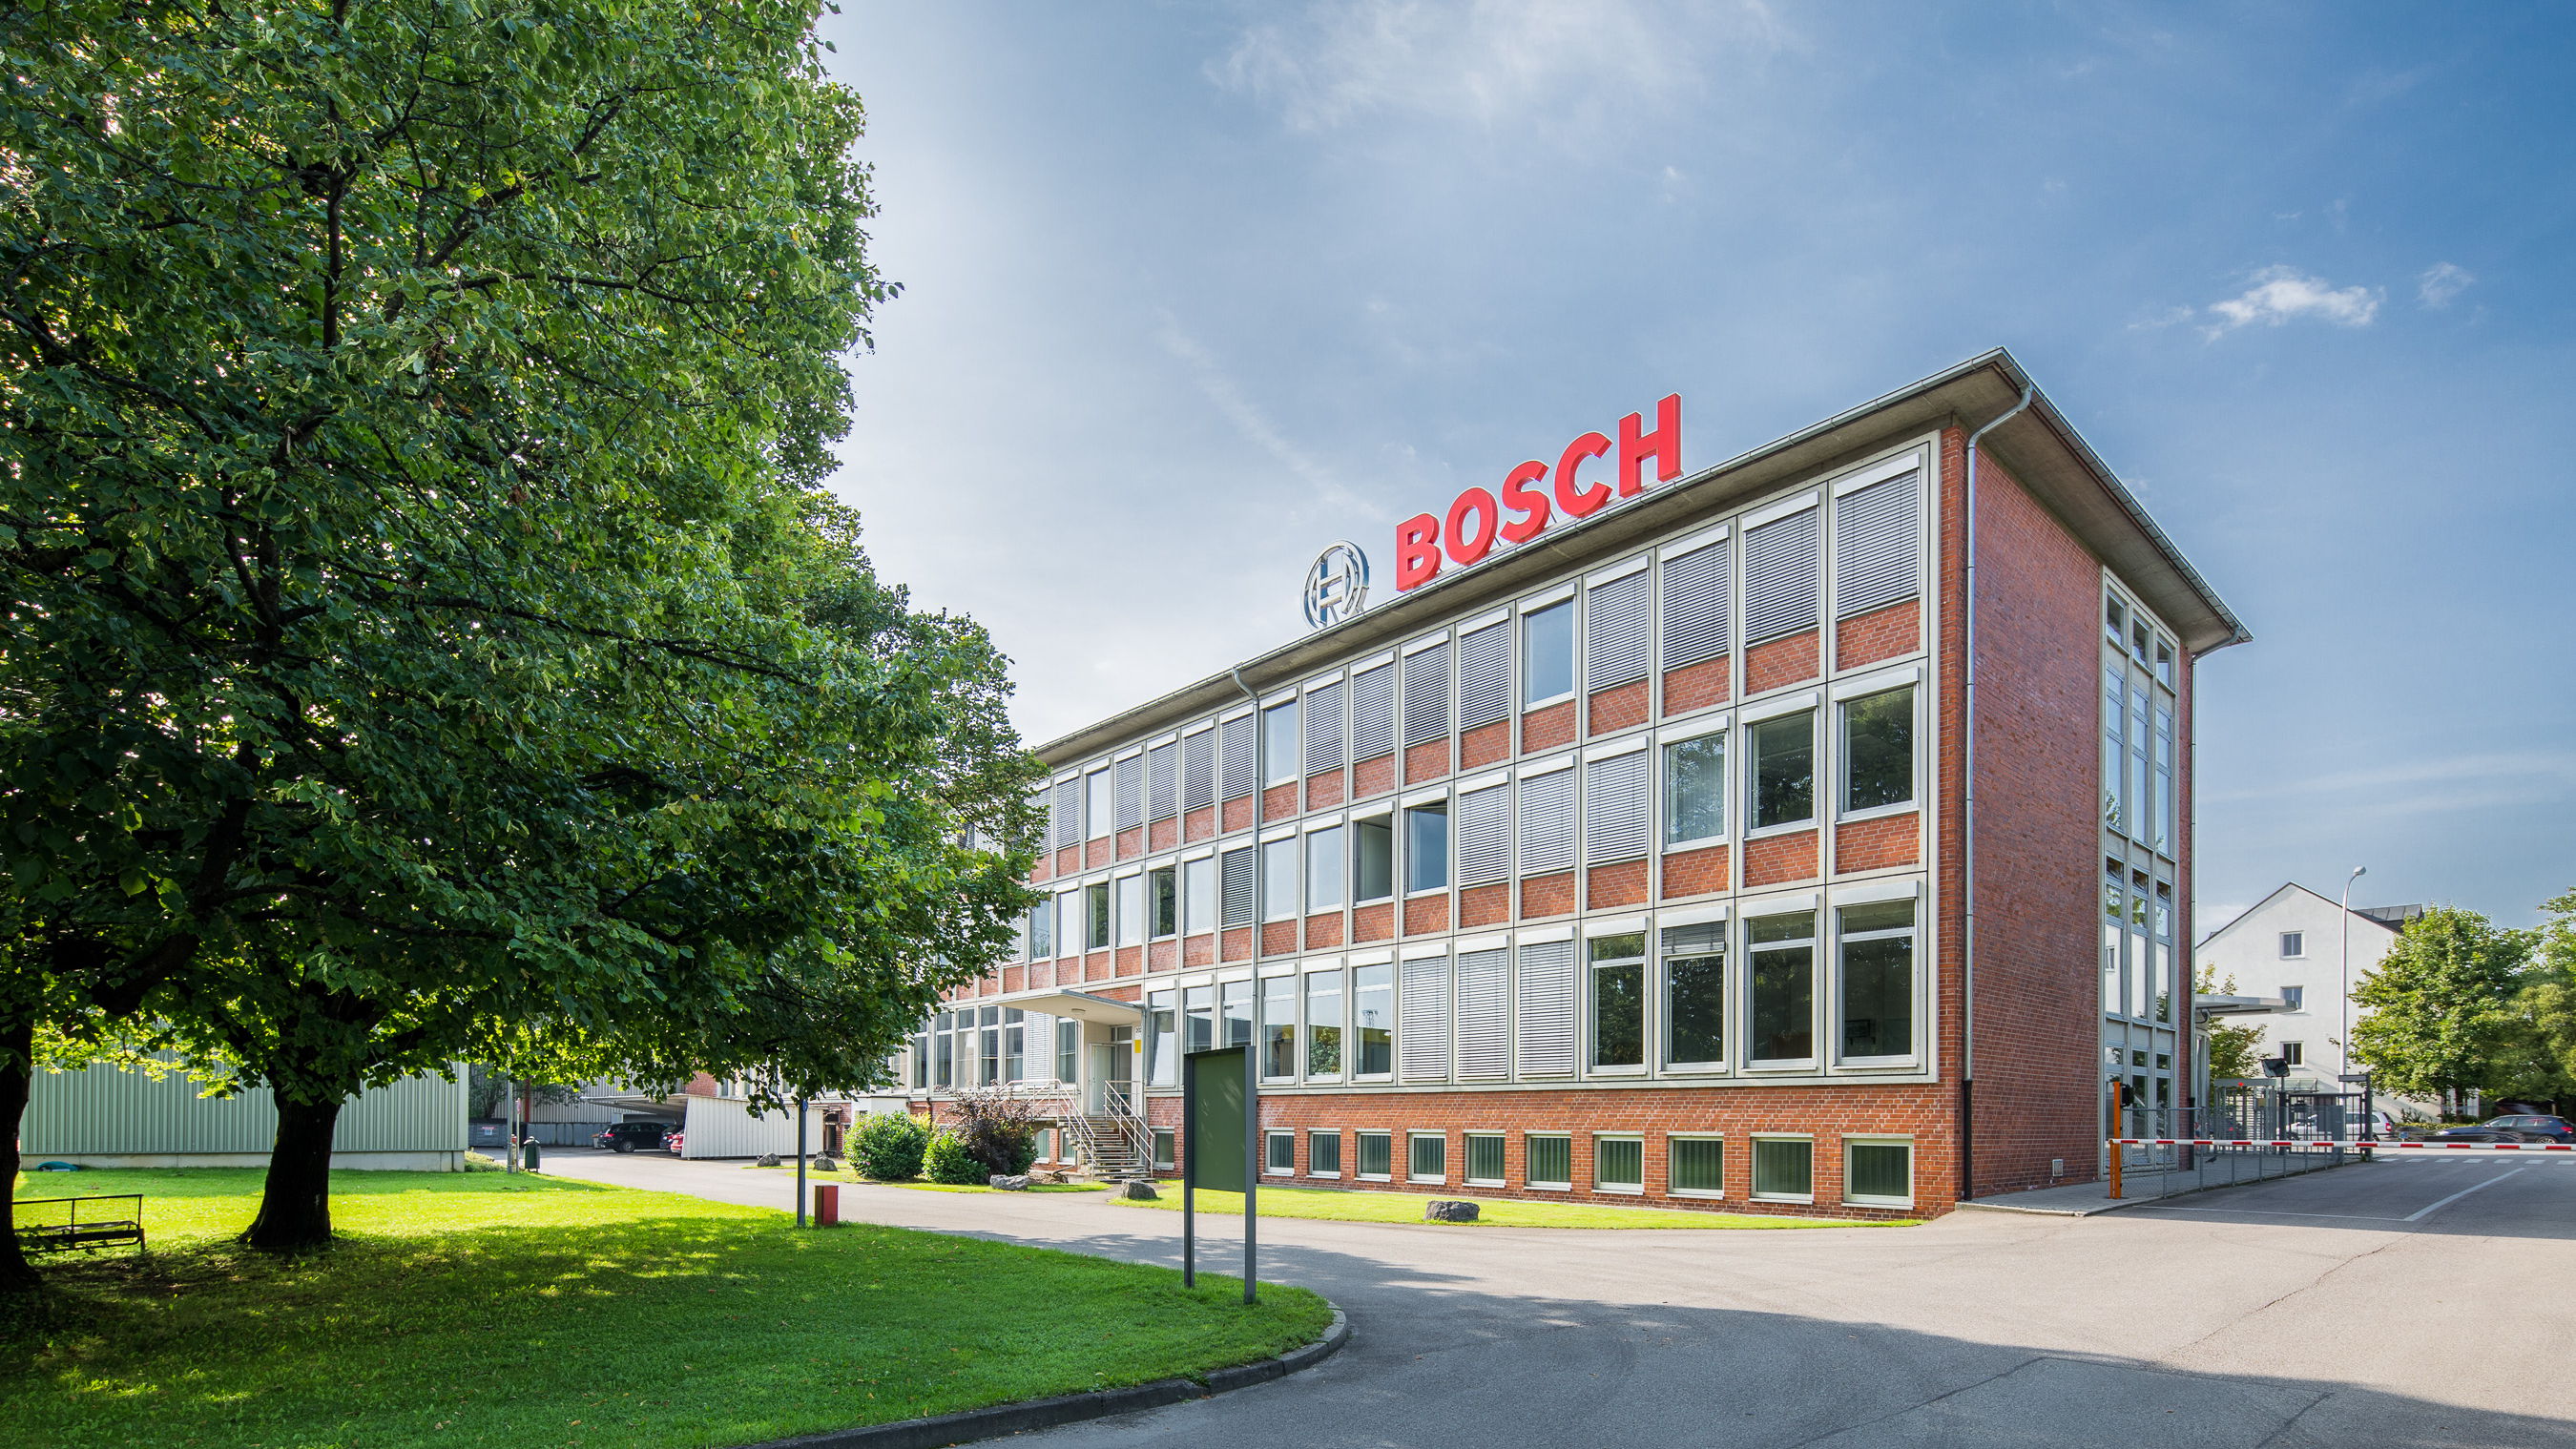 Bosch examines the closure of the Munich plant